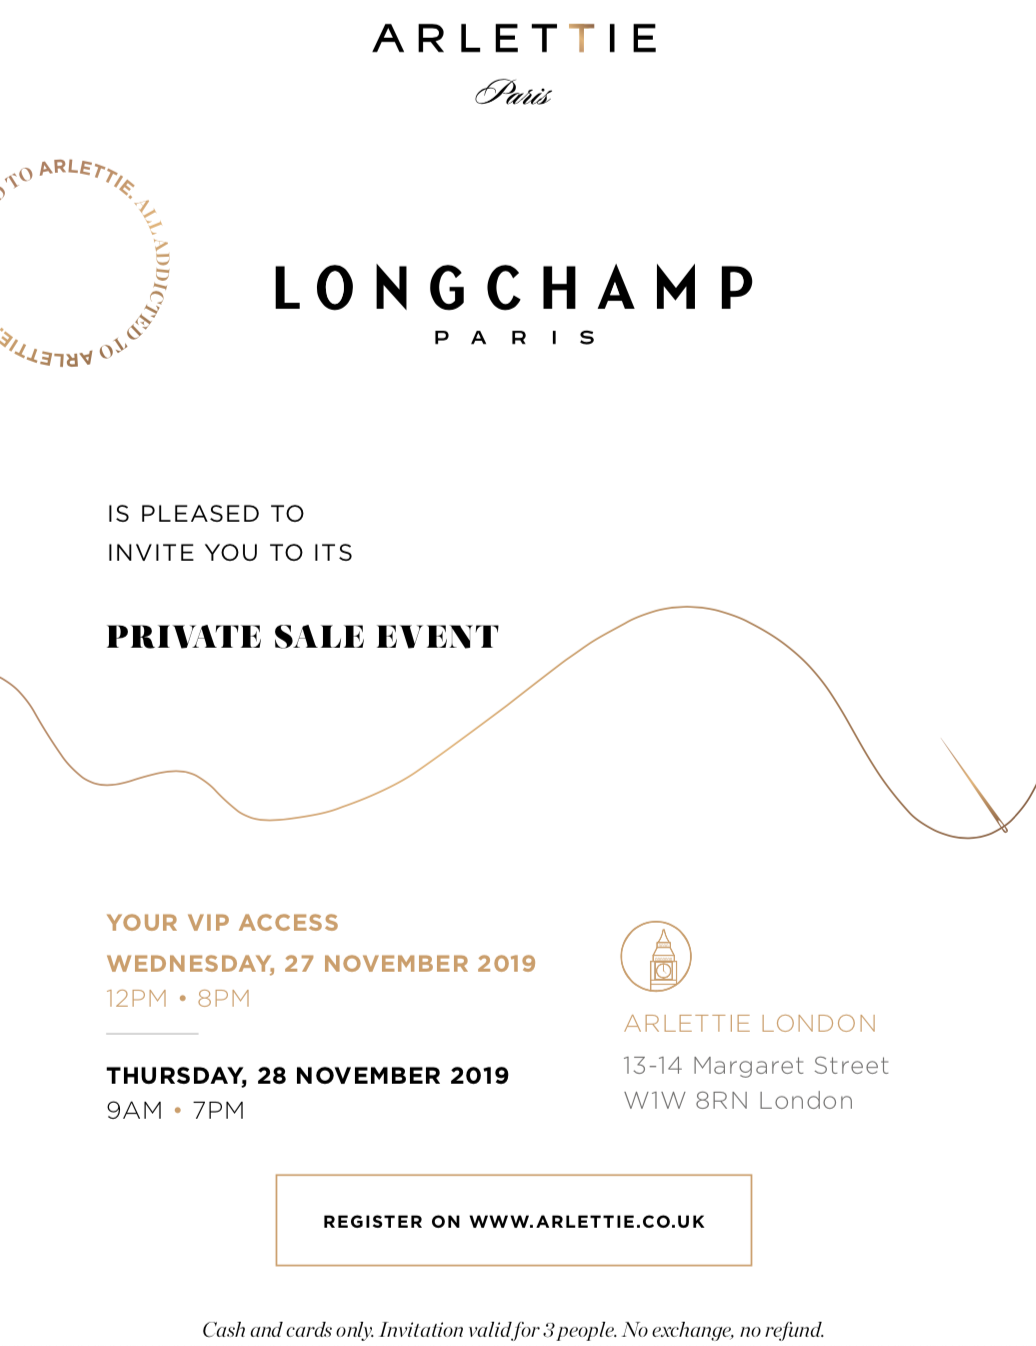 VIP access to the Longchamp Sample Sale 